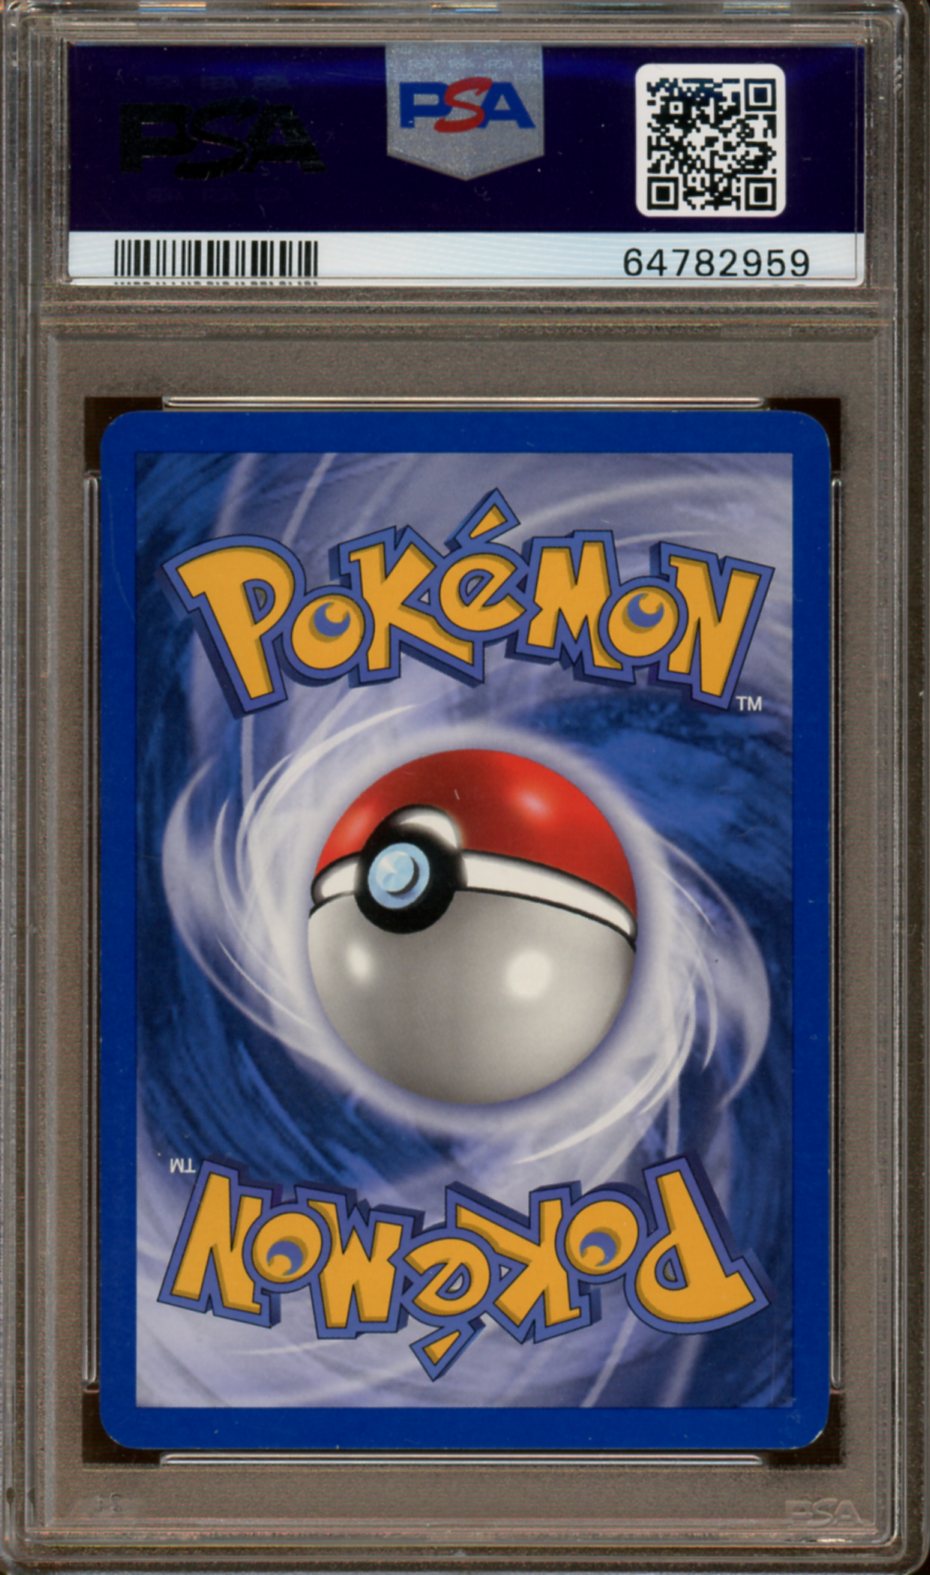 PSA Mint 9 - 2002 Pokemon - Legendary Collection - Squirtle